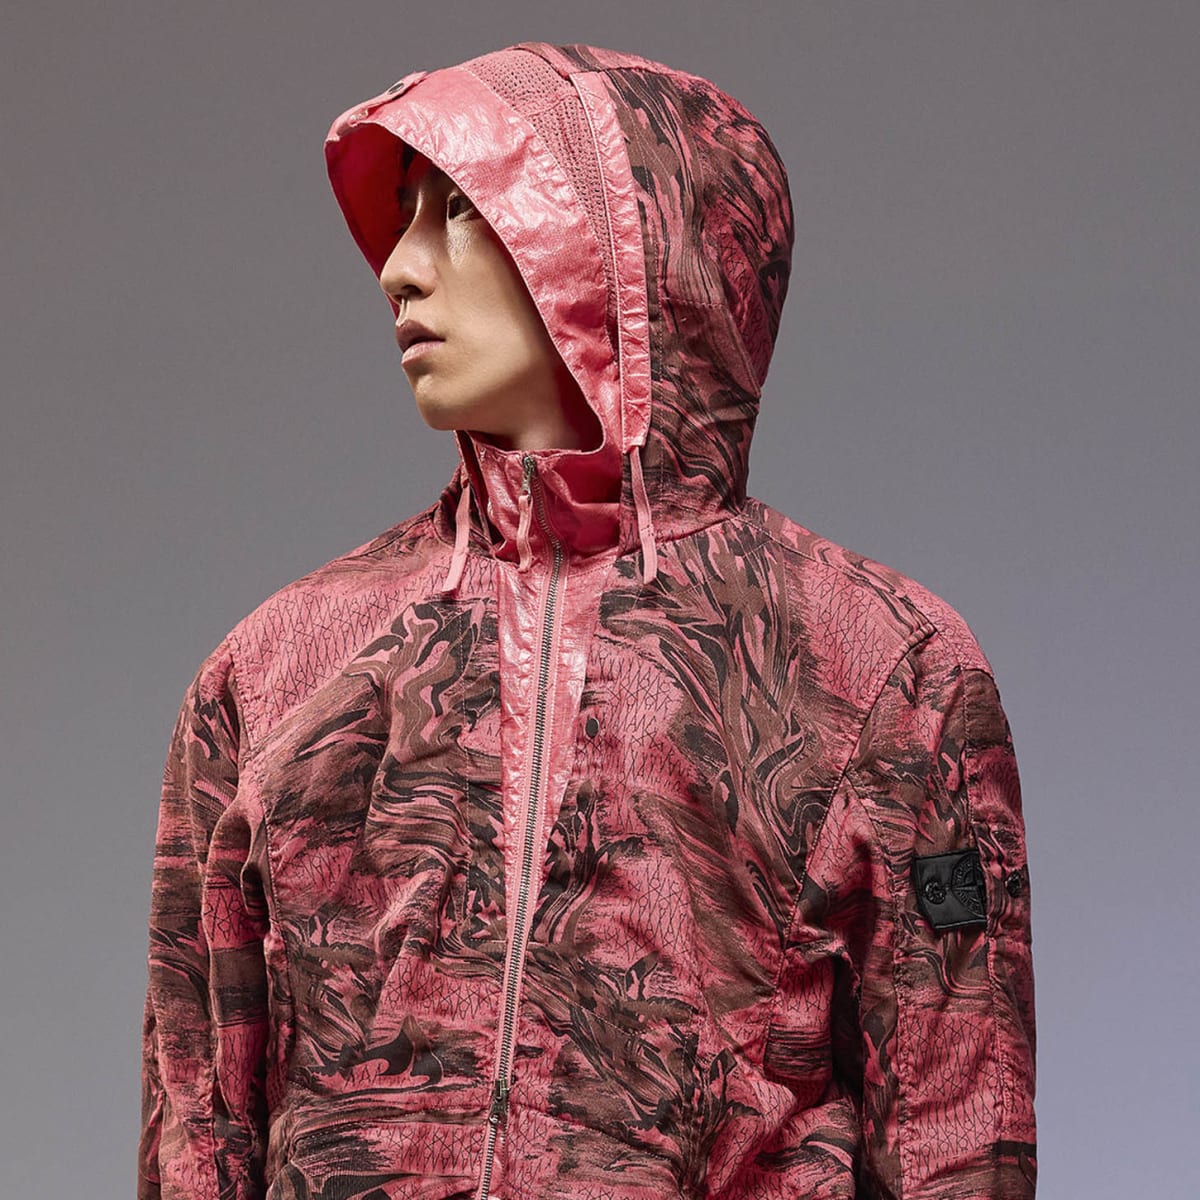 Stone Island releases the first chapter of its Shadow Project 